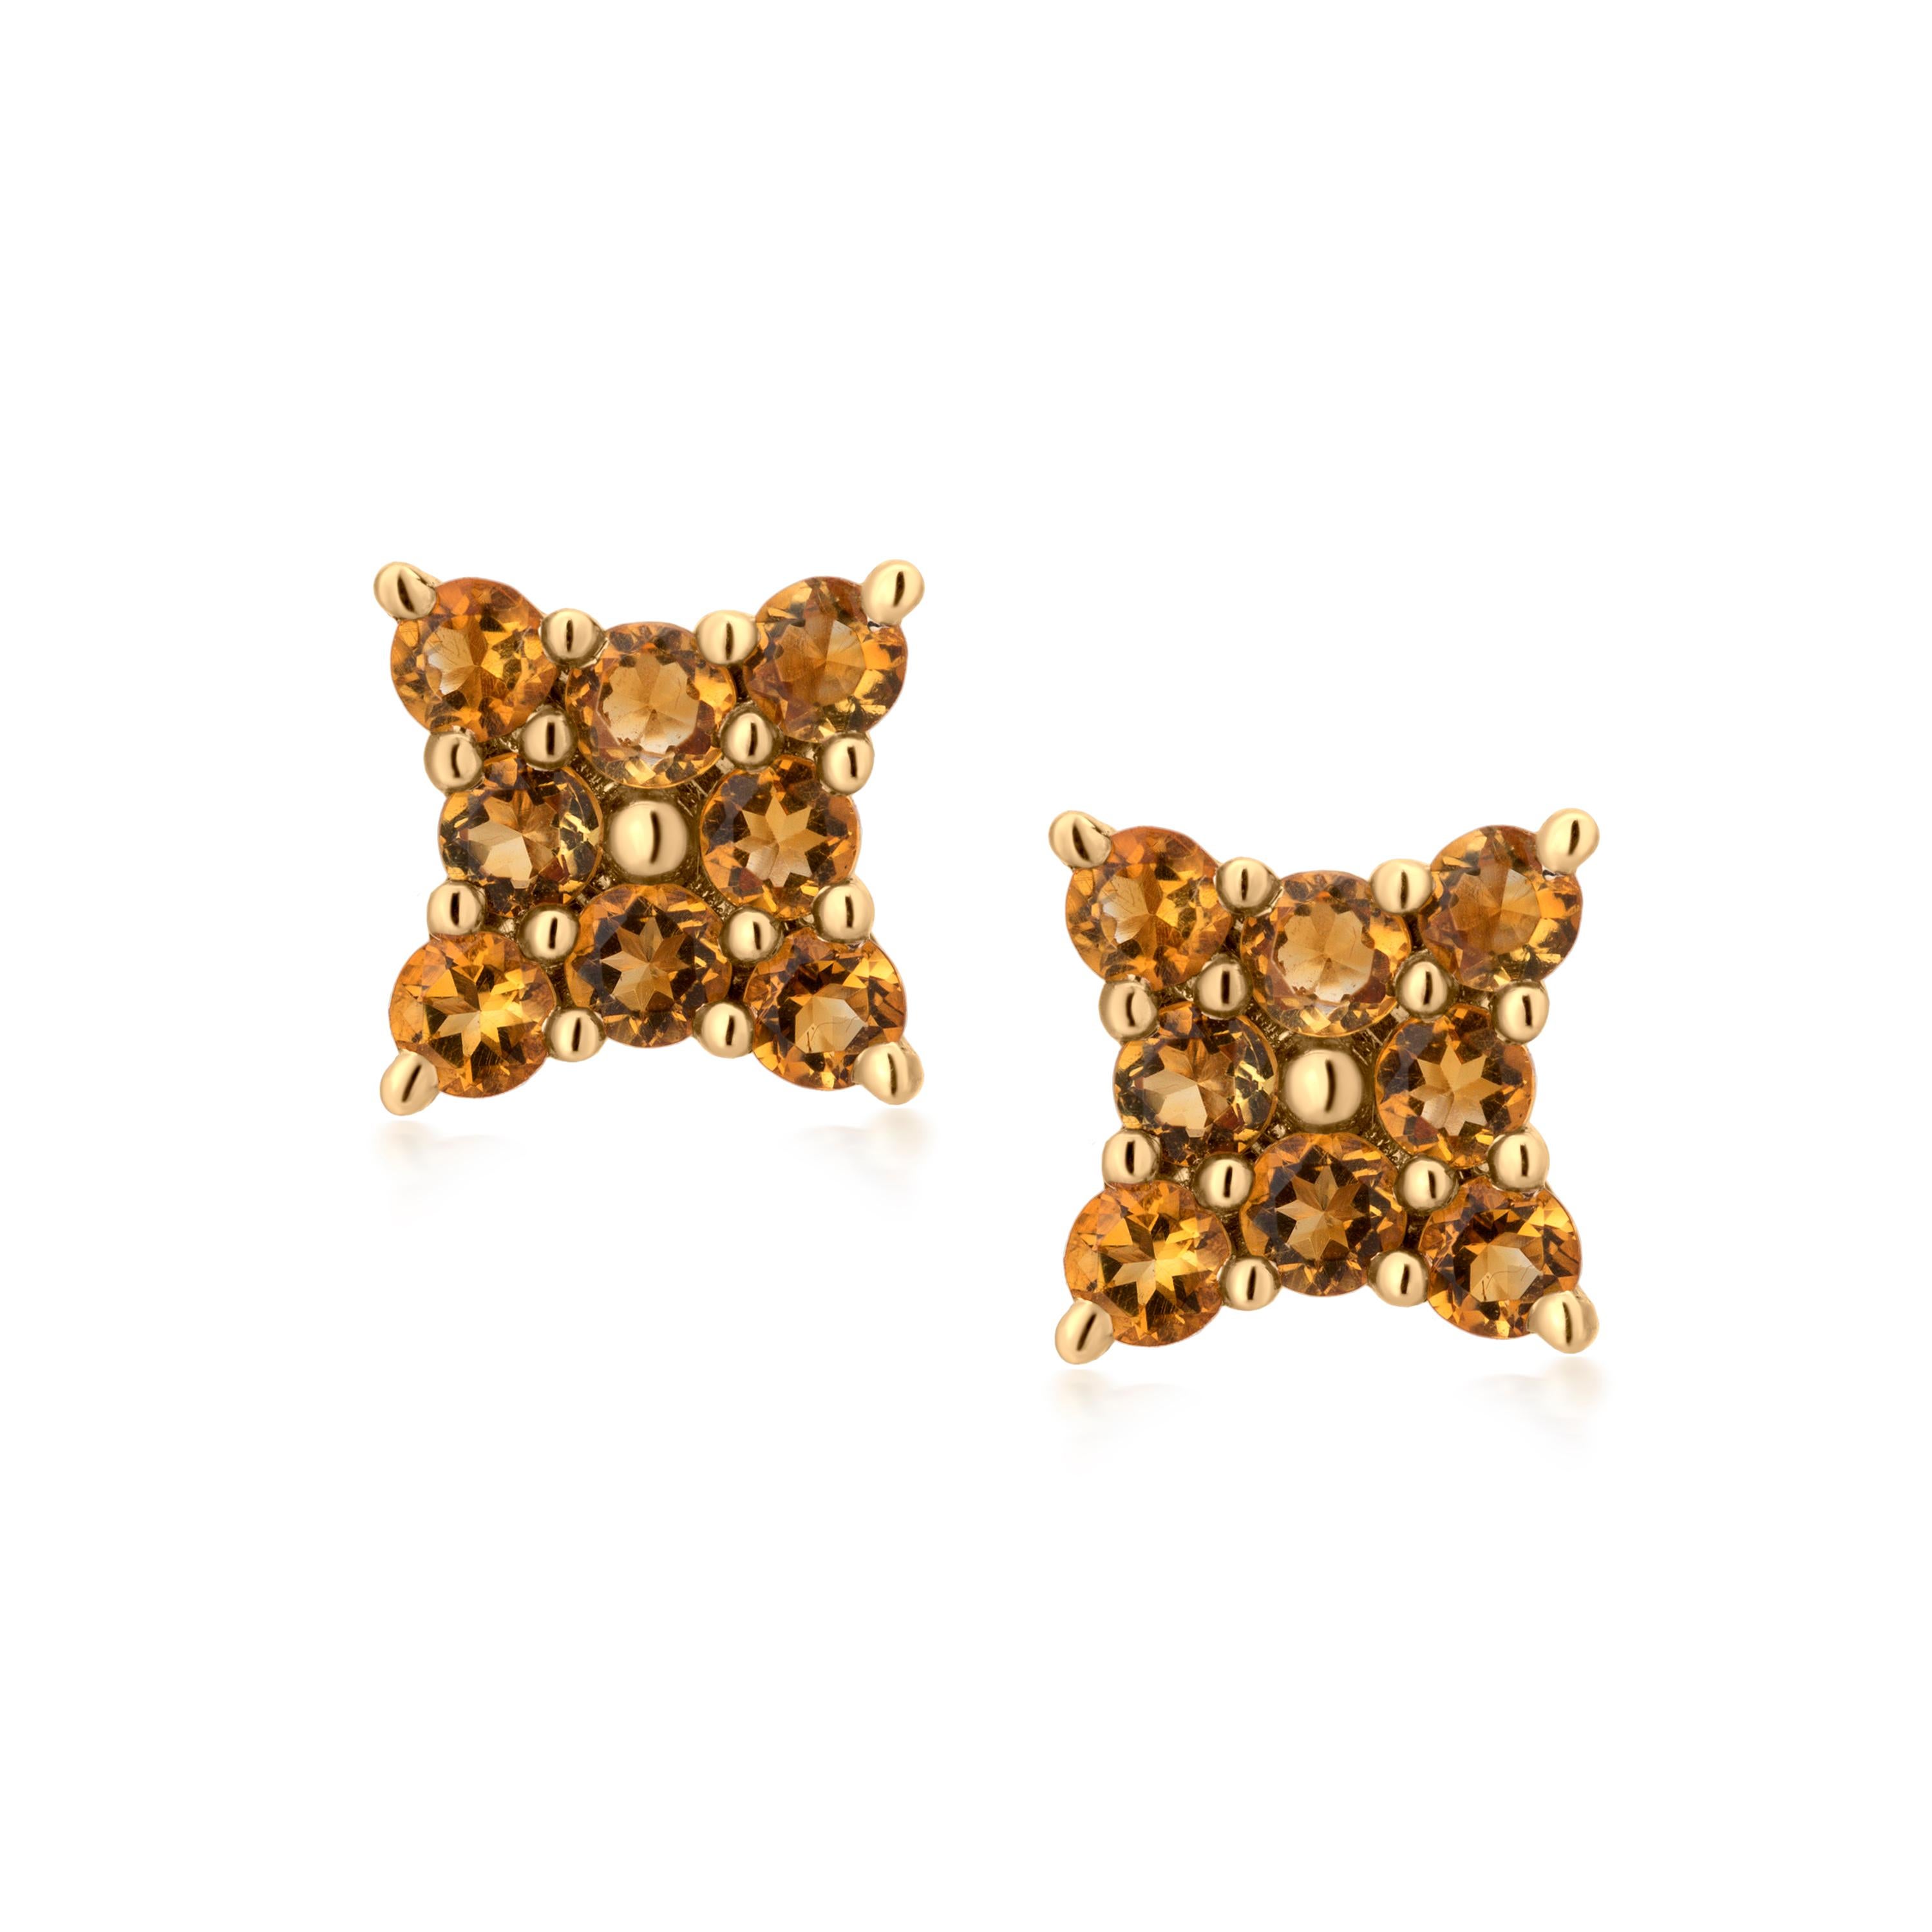 Contemporary Gemistry 0.85cttw Round Citrine Stud Earrings in 14k Yellow Gold For Sale